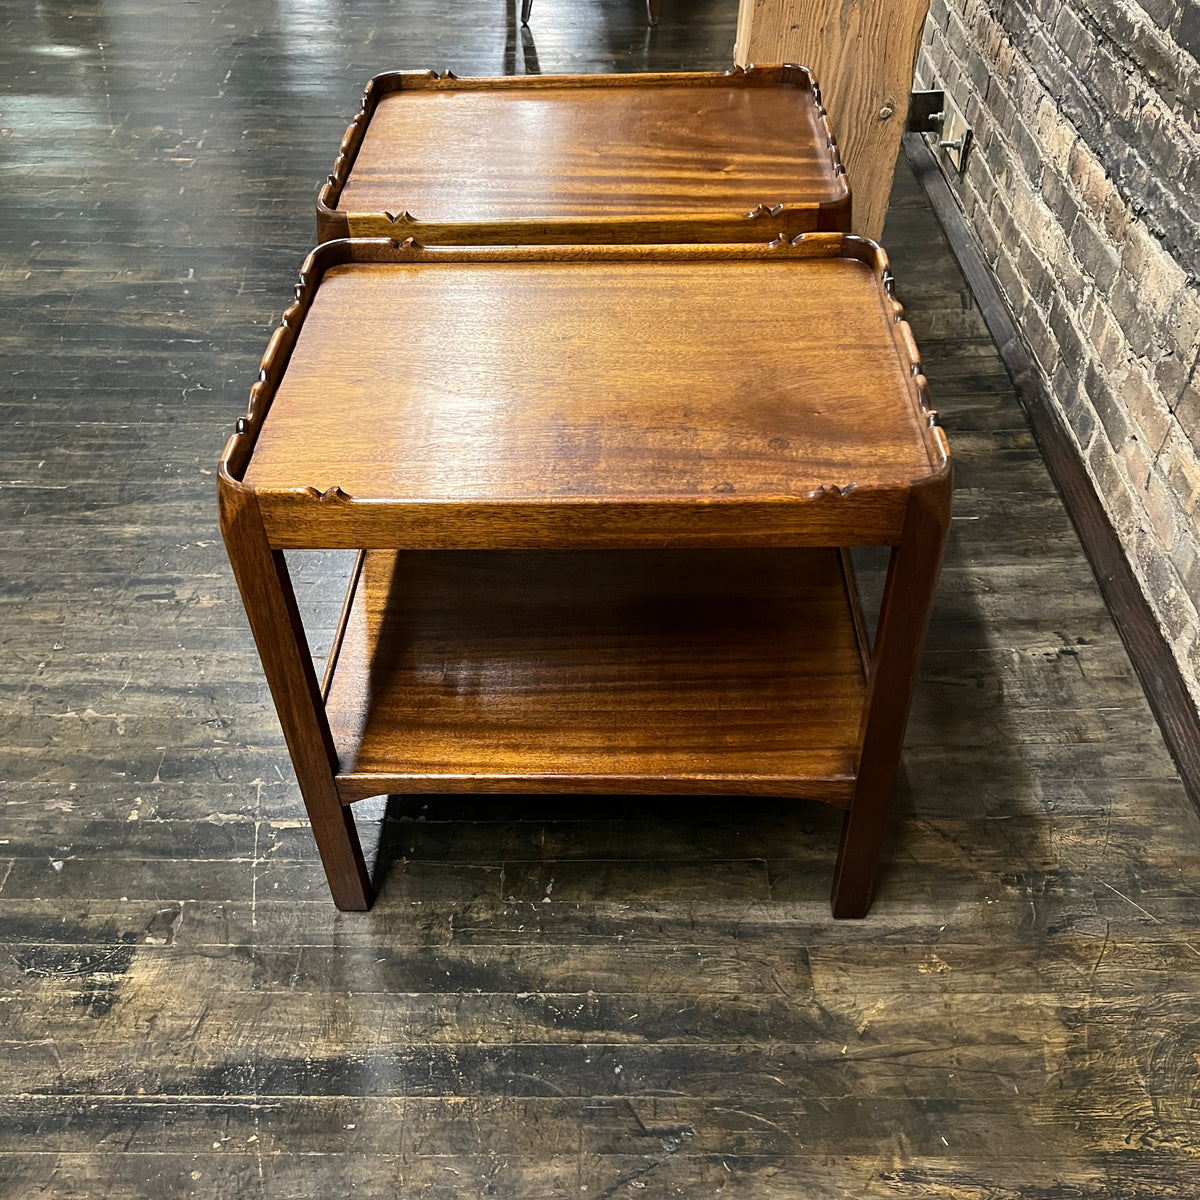 Lovely pair of scalloped edge side tables that appear to be English walnut. They have soft curves, a lower level and amazing patina. Chicago, IL Studio Sonja Milan